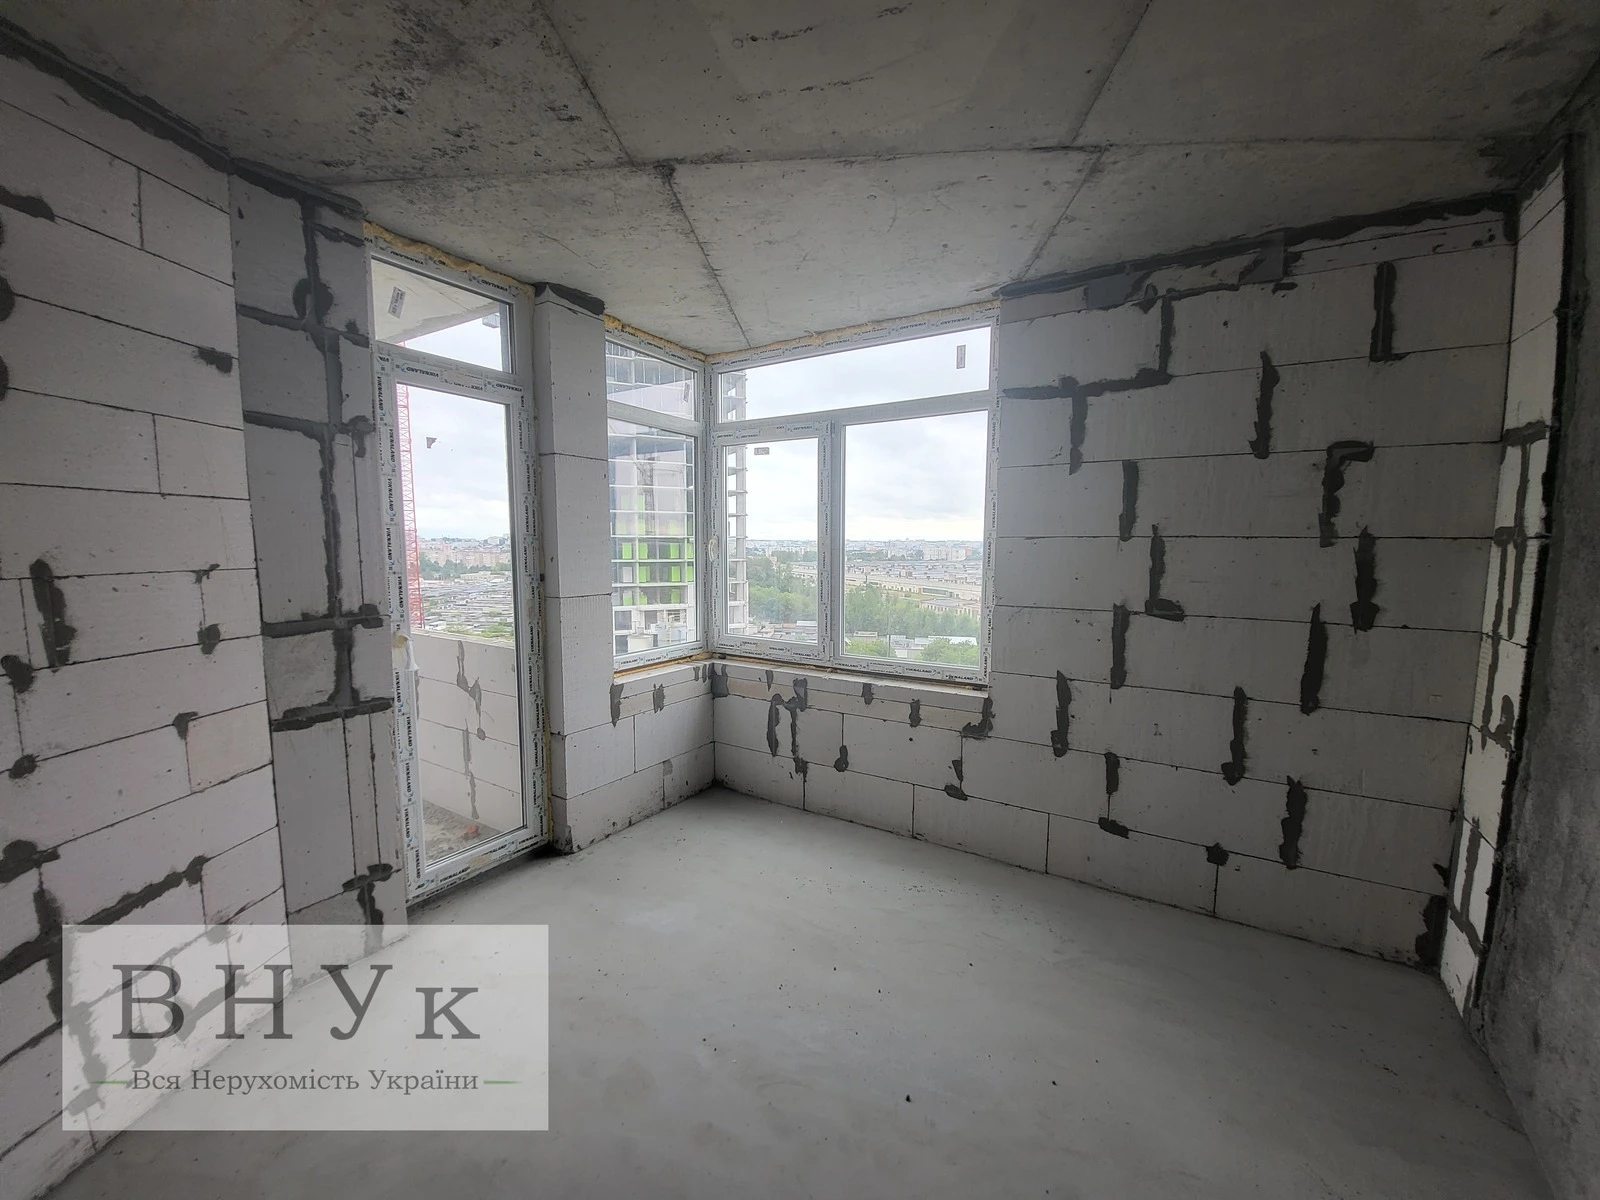 Apartments for sale. 1 room, 35 m², 5th floor/11 floors. Smakuly , Ternopil. 